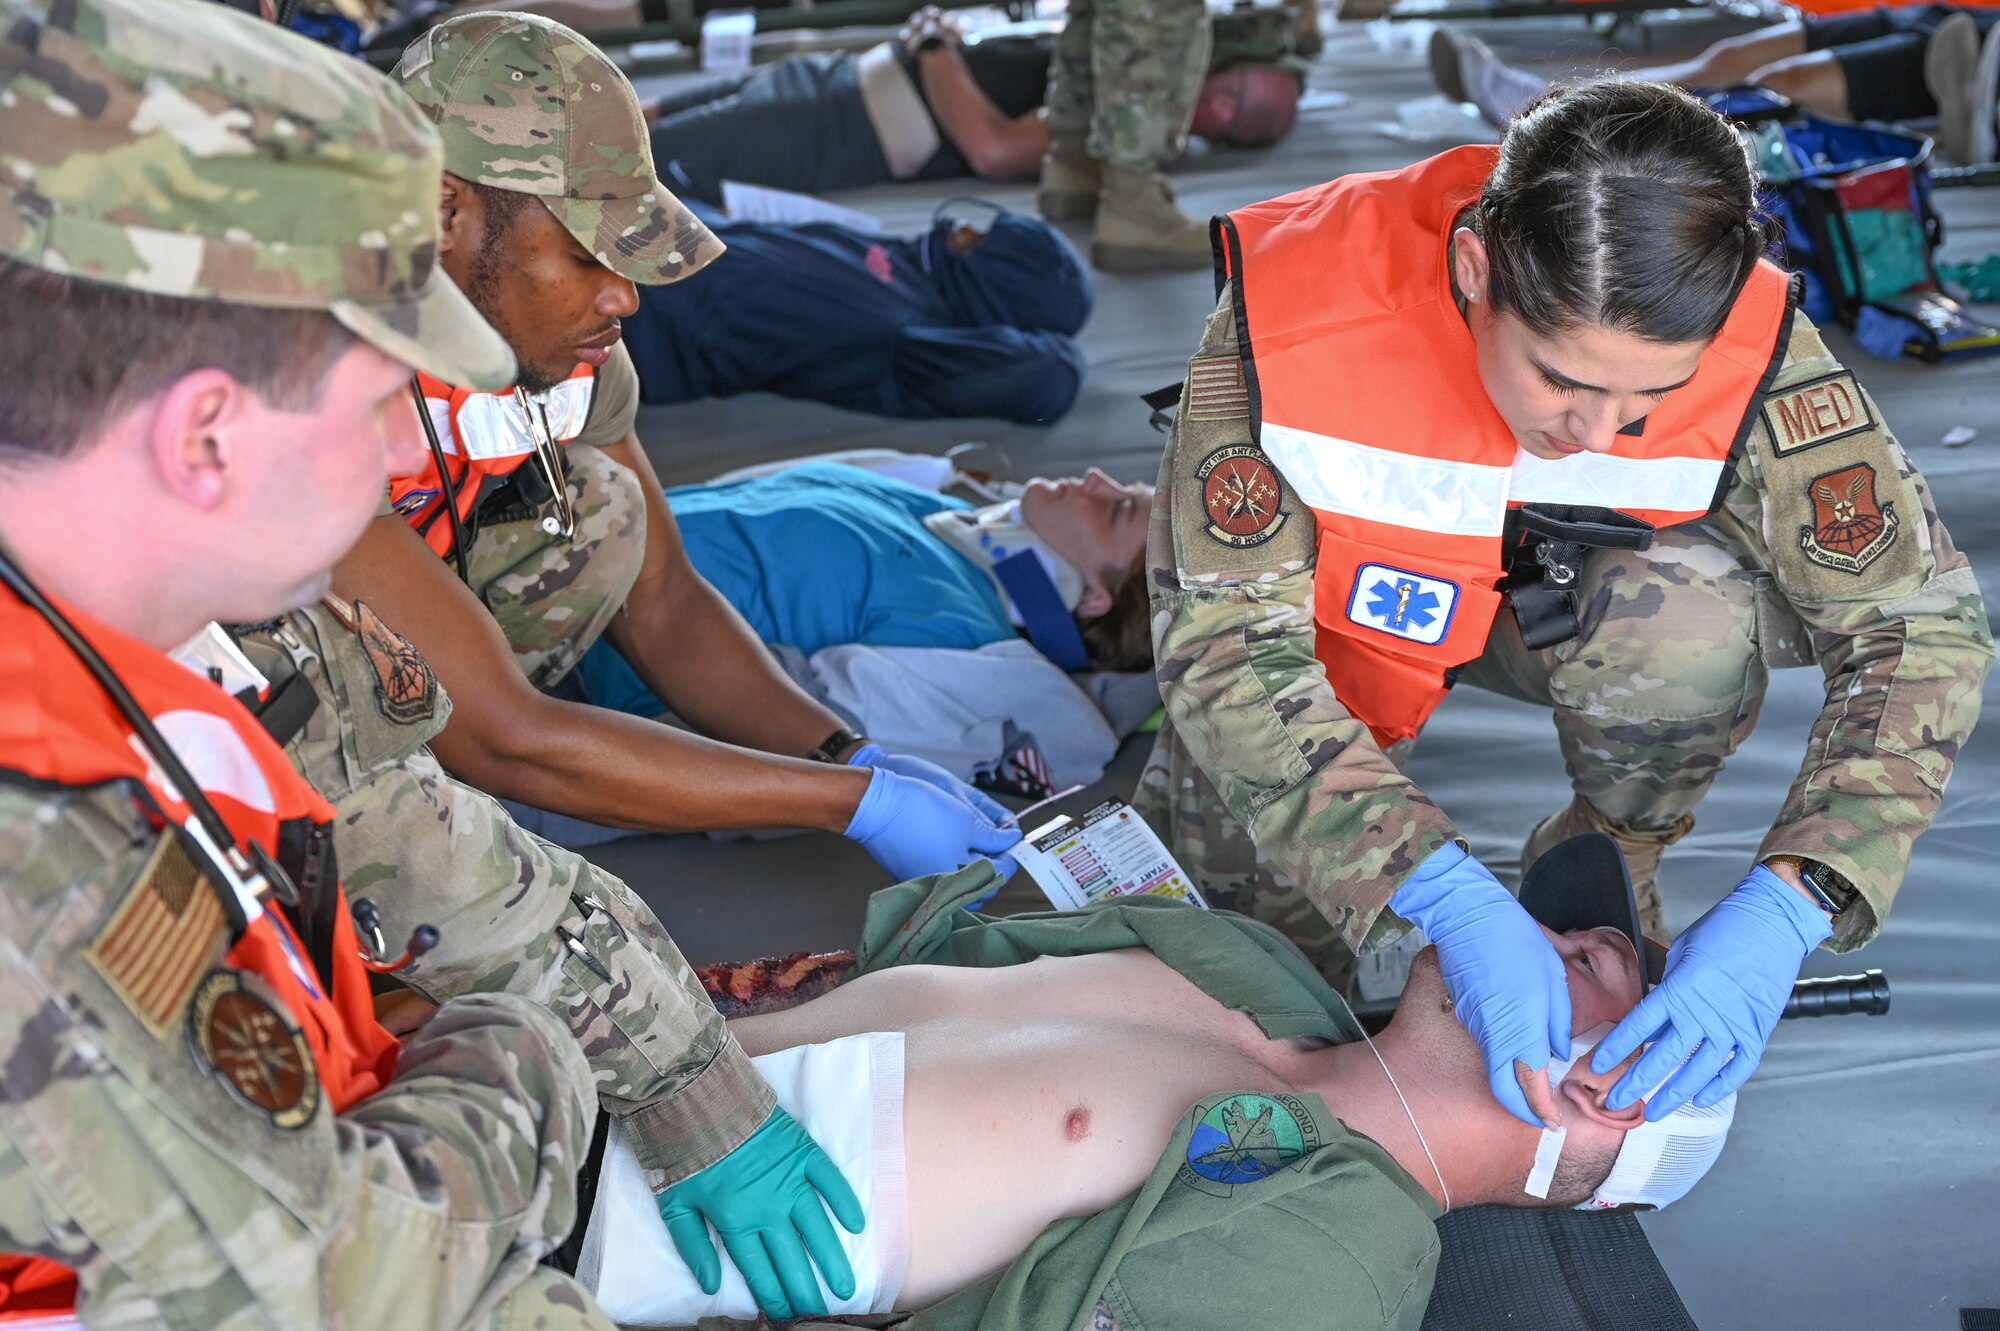 Senior Airman Brody Swab, 790th Missile Security Forces Squadron member, is treated for simulated injuries during the 2022 major accident response exercise, June 29, 2022, on F.E. Warren Air Force Base, Wyoming. The medical group participates in exercises to prepare for the possibility of real-world events. (U.S. Air Force photo by Airman 1st Class Sarah Post)